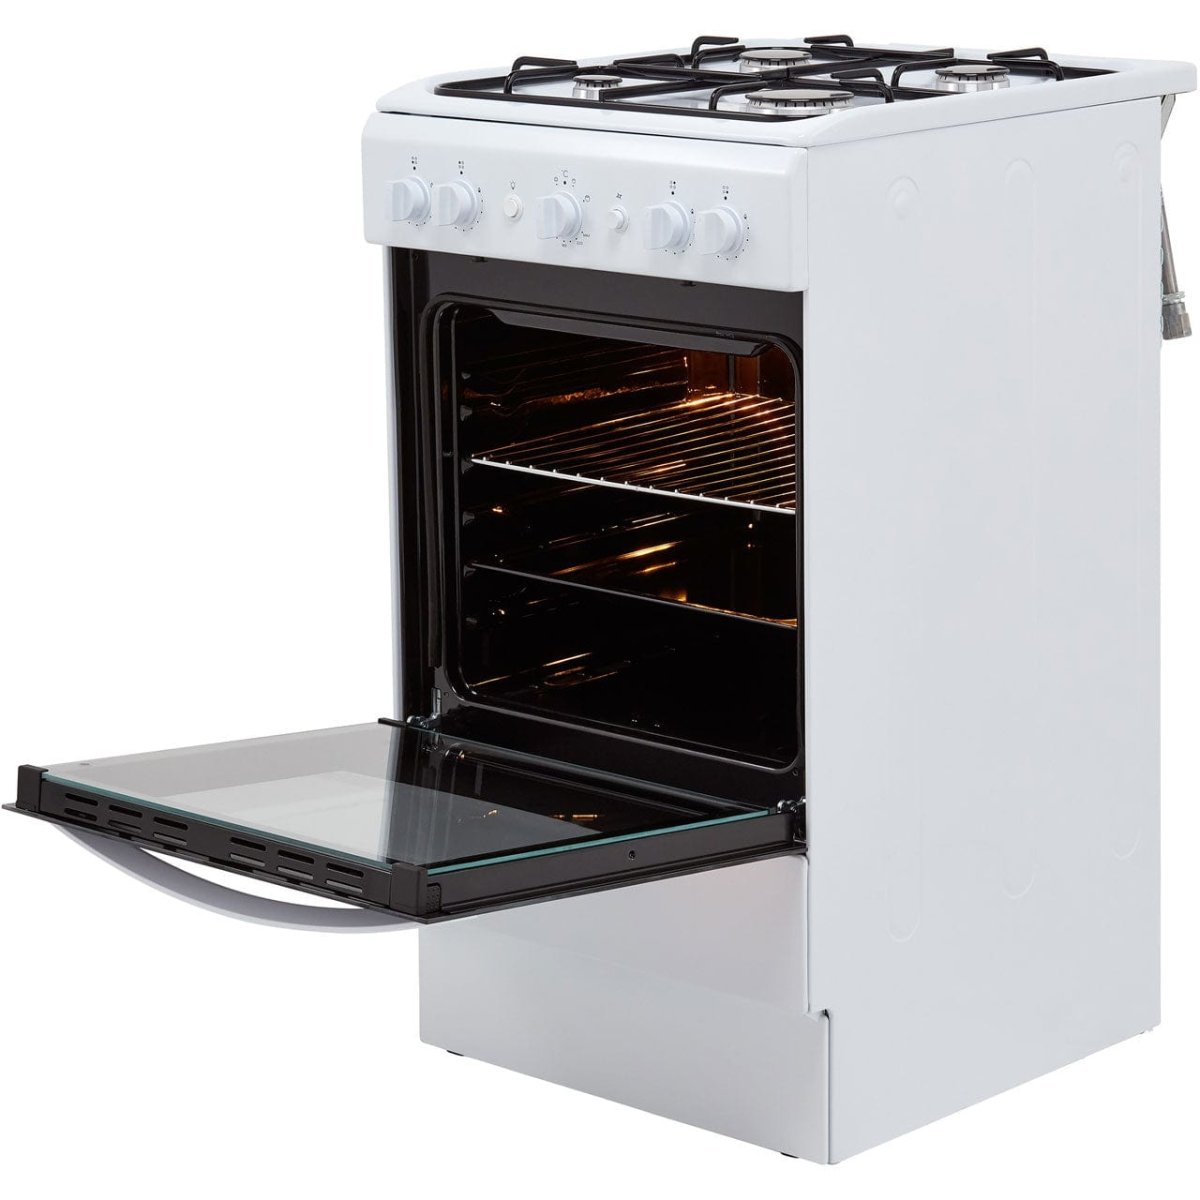 Indesit Cloe IS5G1KMW 50cm Gas Cooker - White - A Rated | Atlantic Electrics